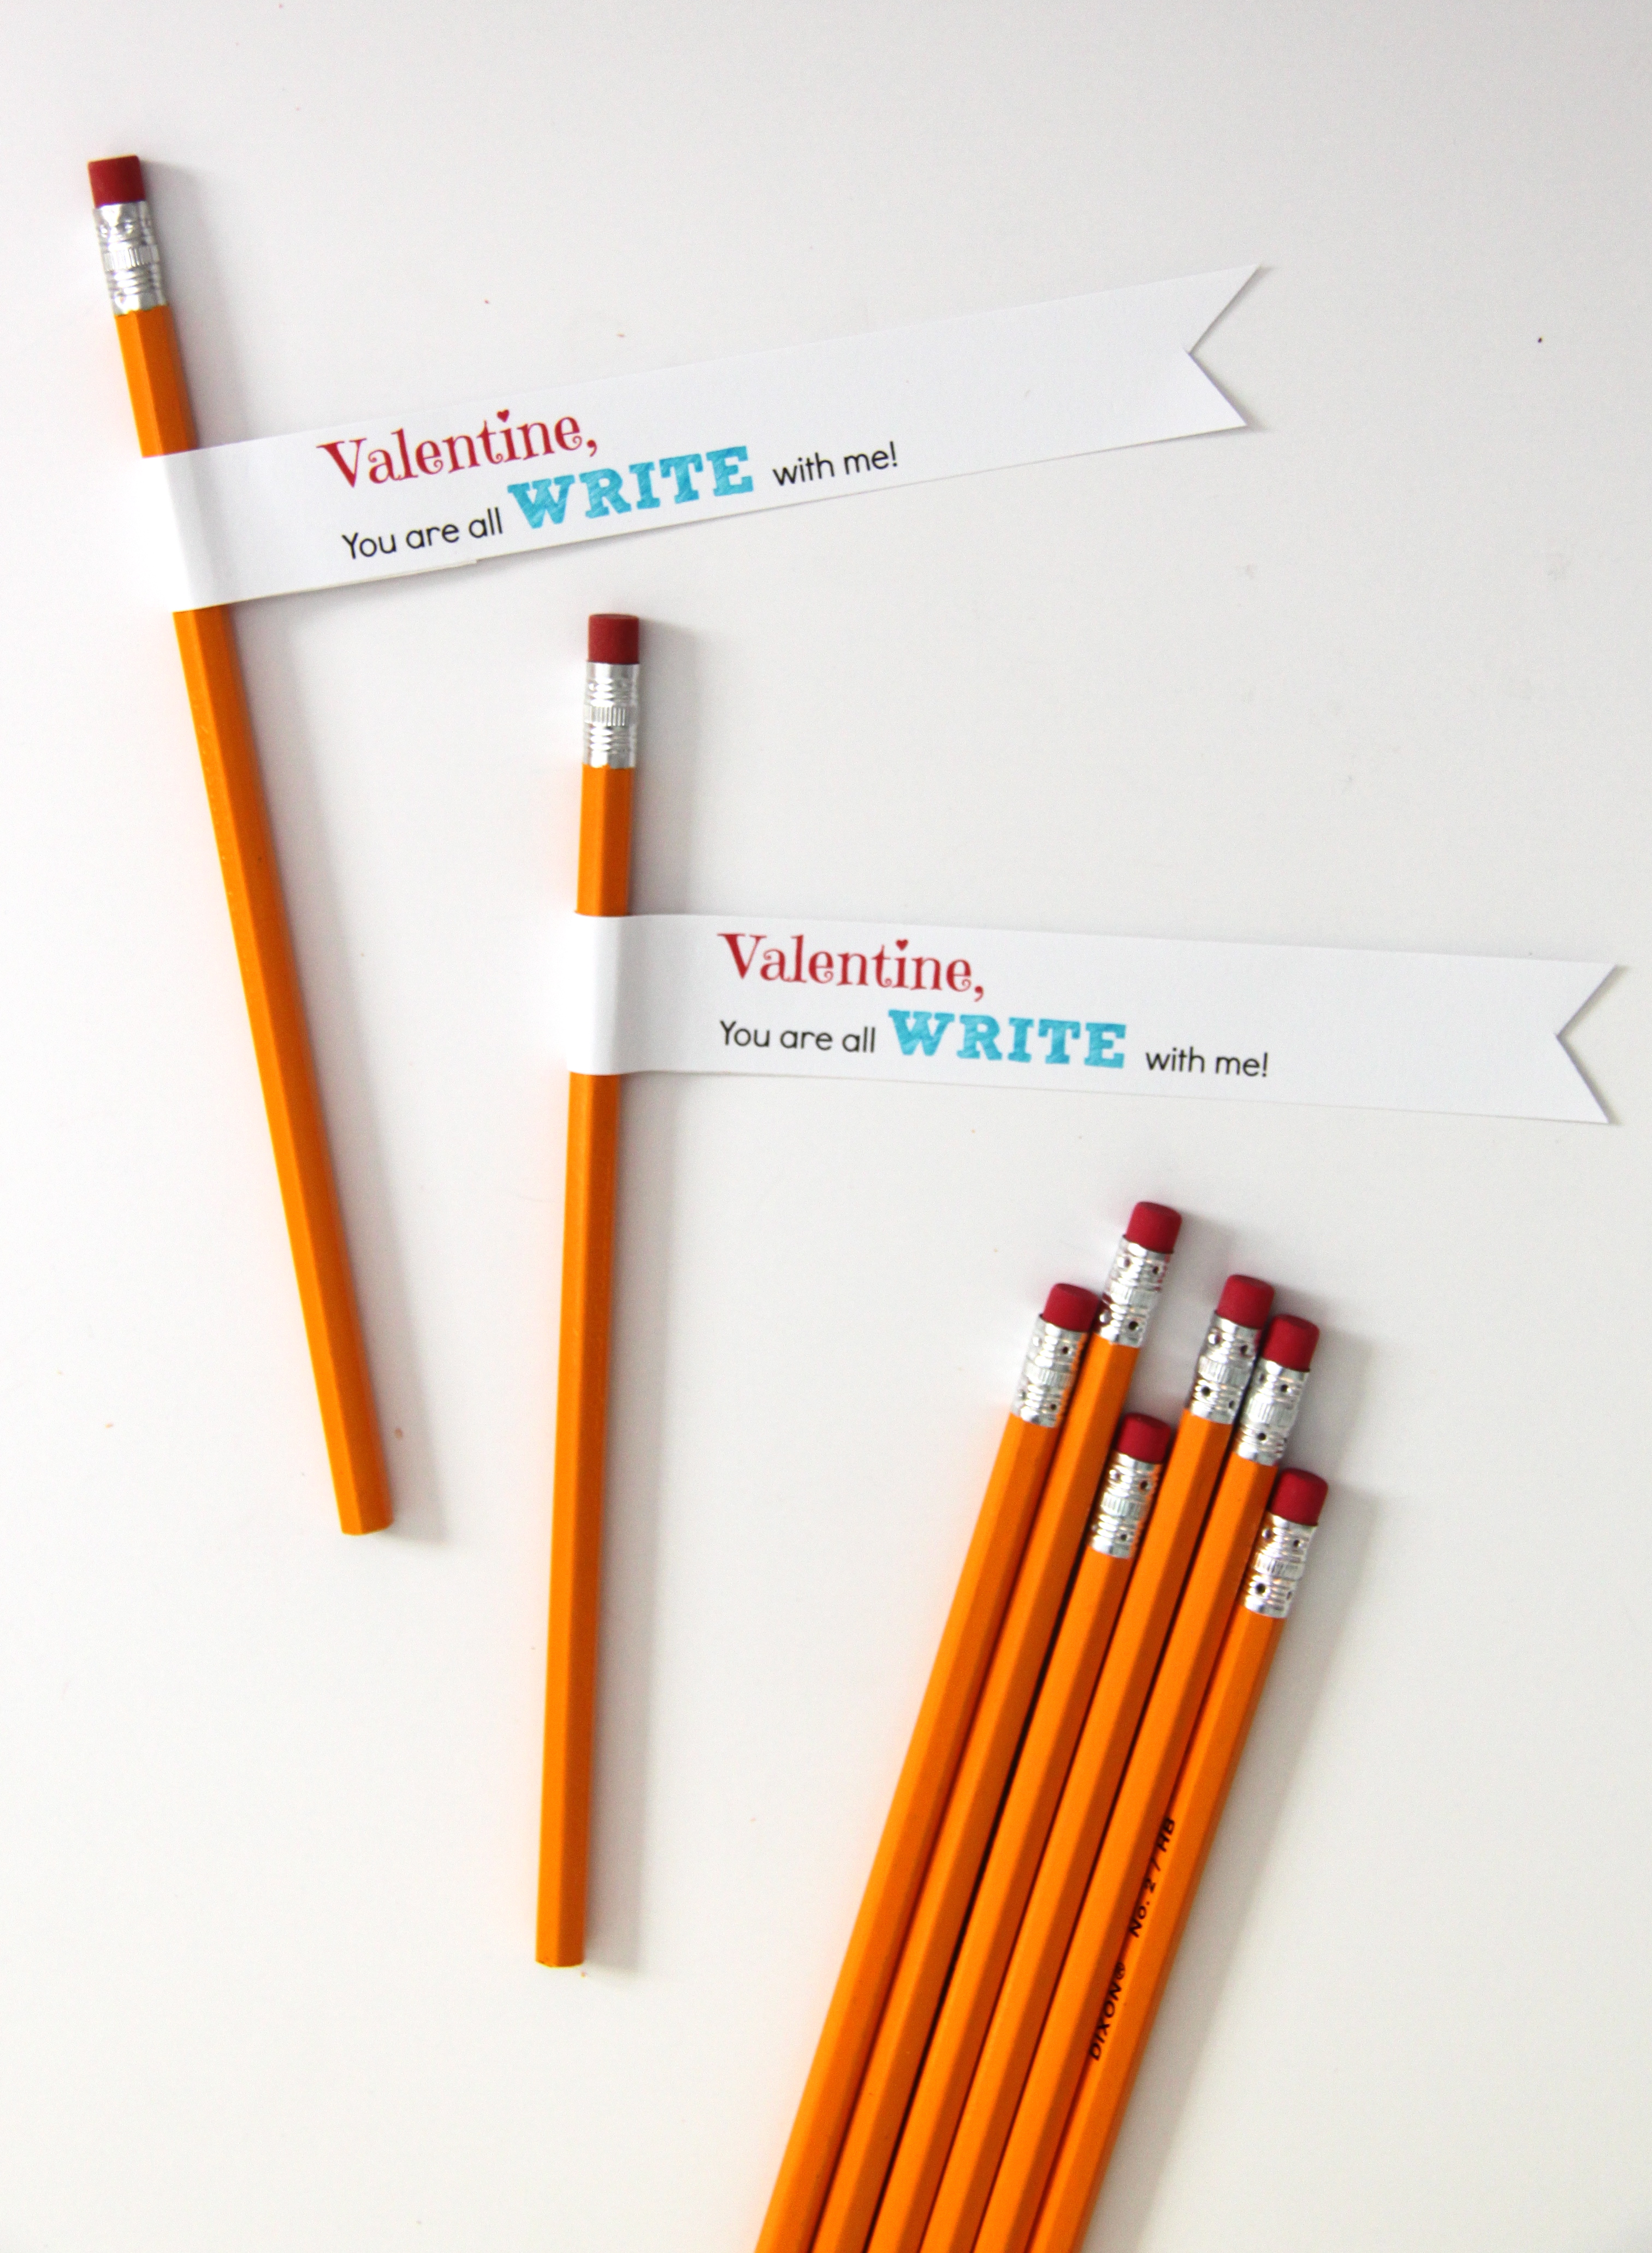 FREE Printable: Valentine, you are all WRITE with me - Smashed Peas & Carrots